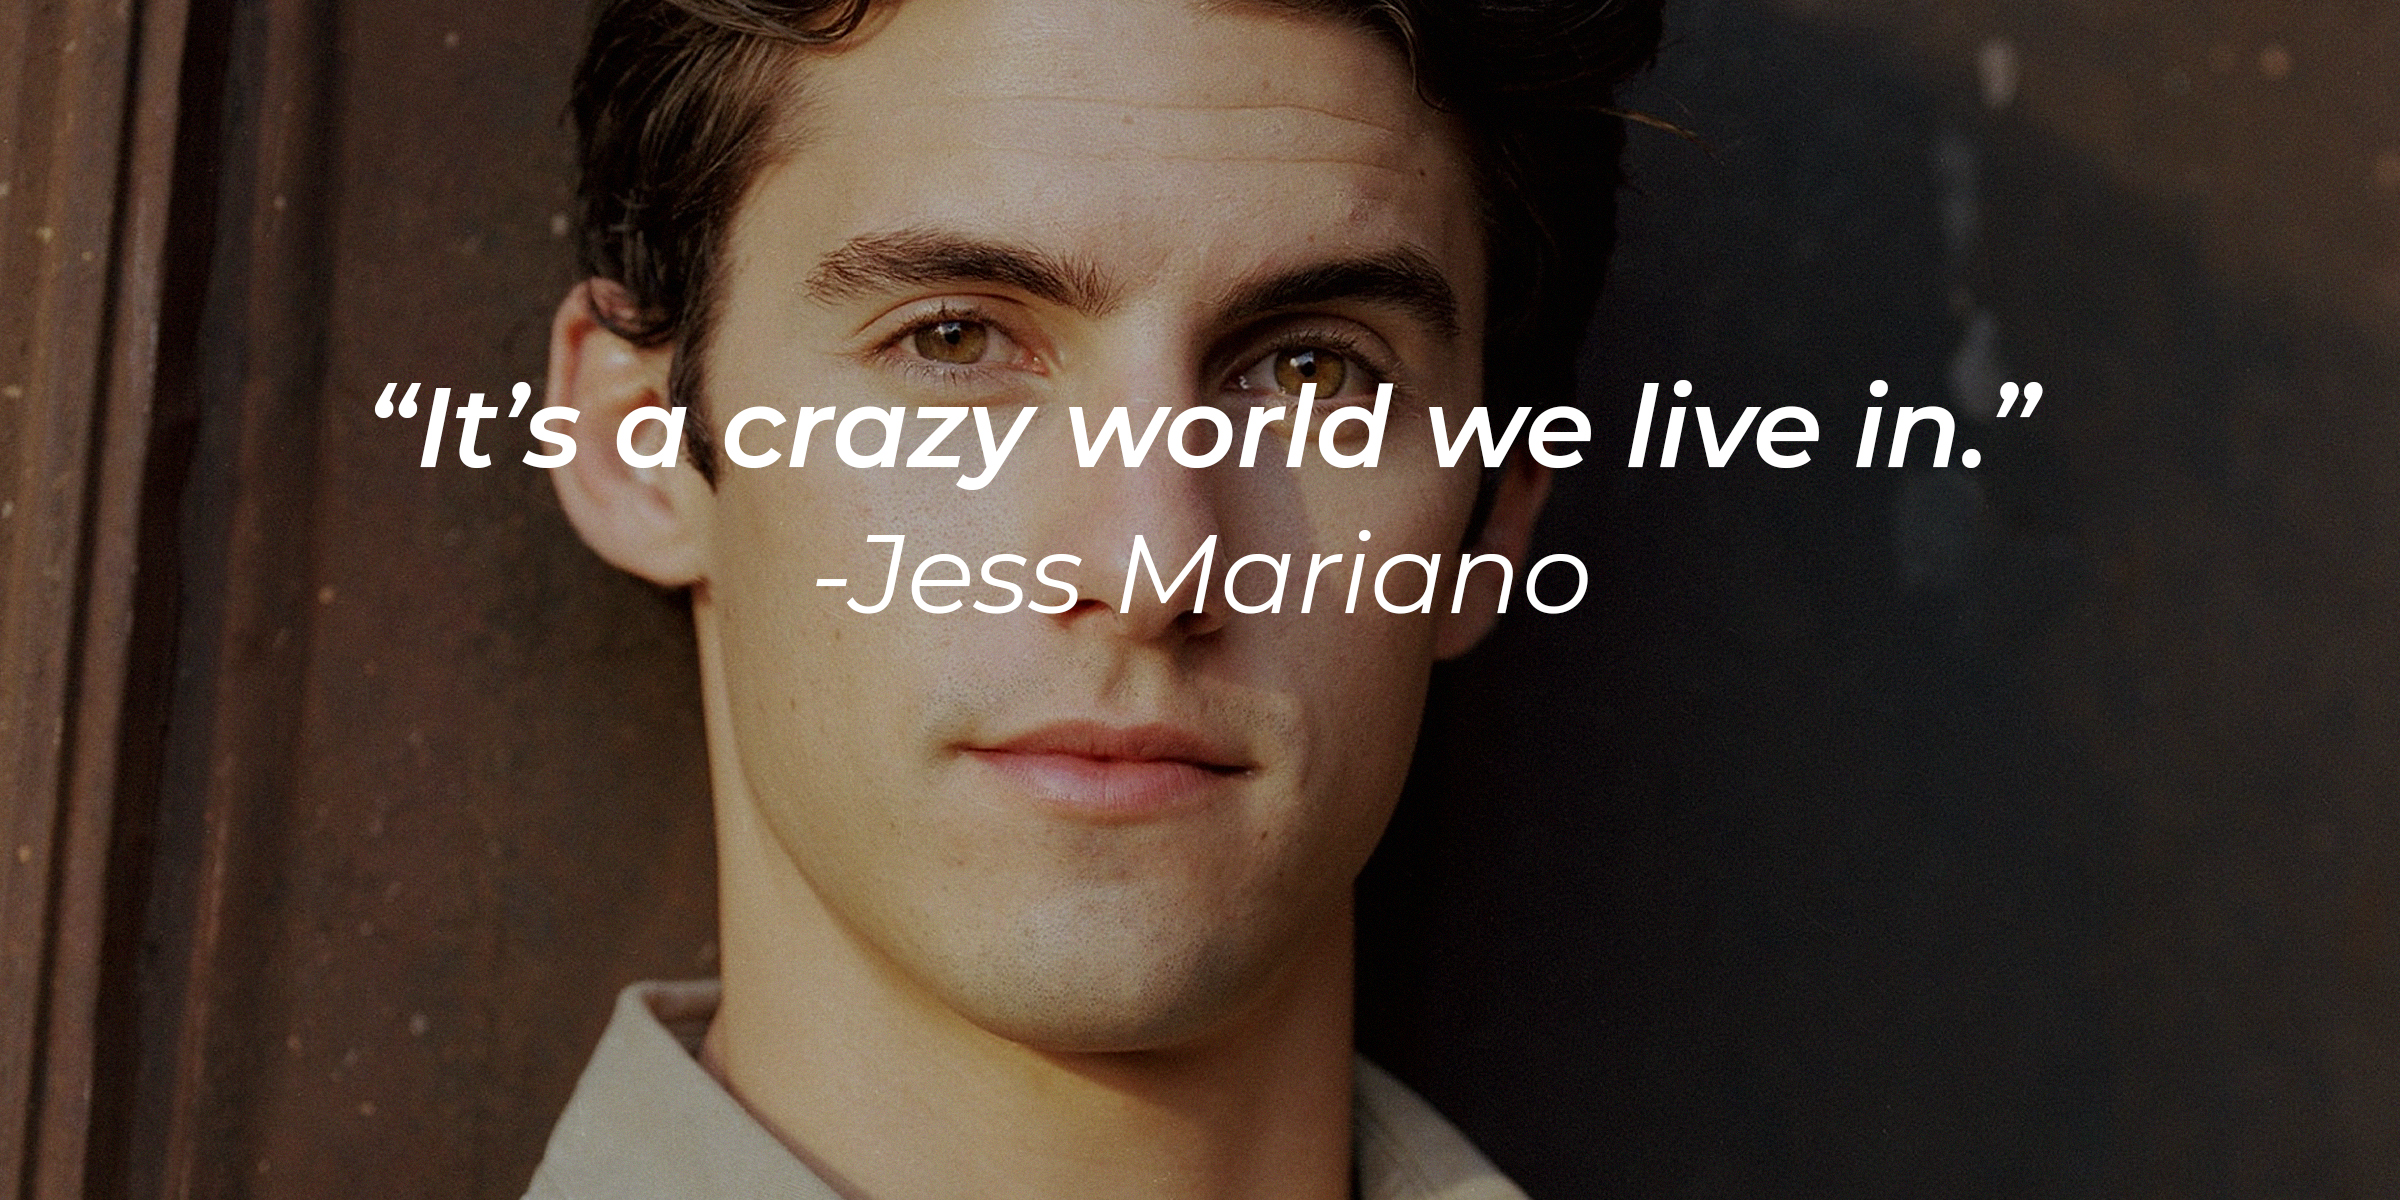 Jess Mariano, with his quote: “It’s a crazy world we live in.” | Source: facebook.com/GilmoreGirls